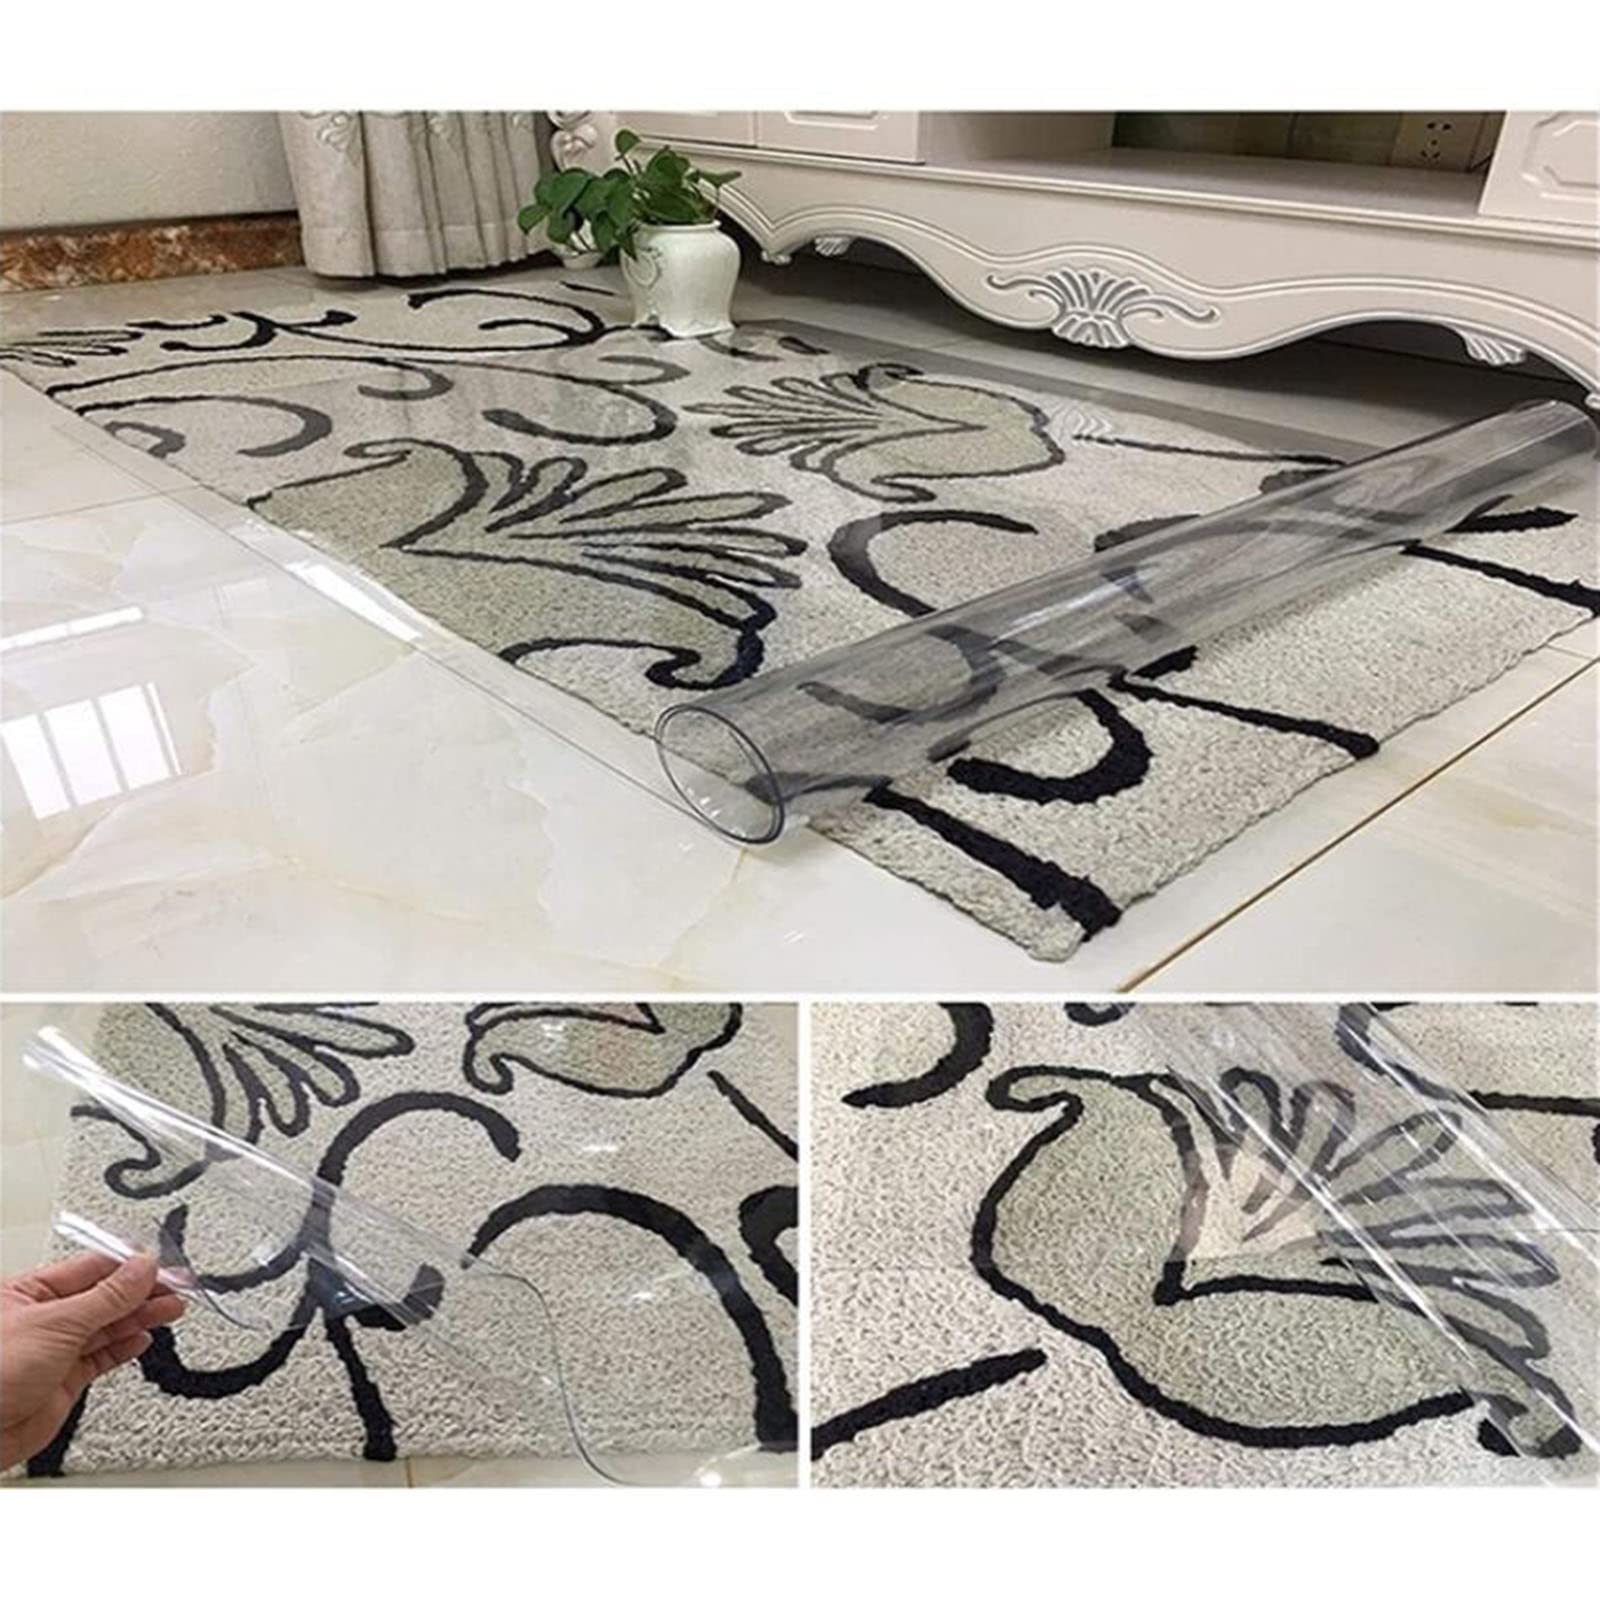 Clear PVC Desk Chair Mat PVC Carpet Protector for Hardwood Floors,100% Waterproof Vinyl Plastic Floor Mat,Can Be Cut for Hardwood Floor, Can Be Cut,75/95/115/135/155/165cm Wide for Office & Home (Col